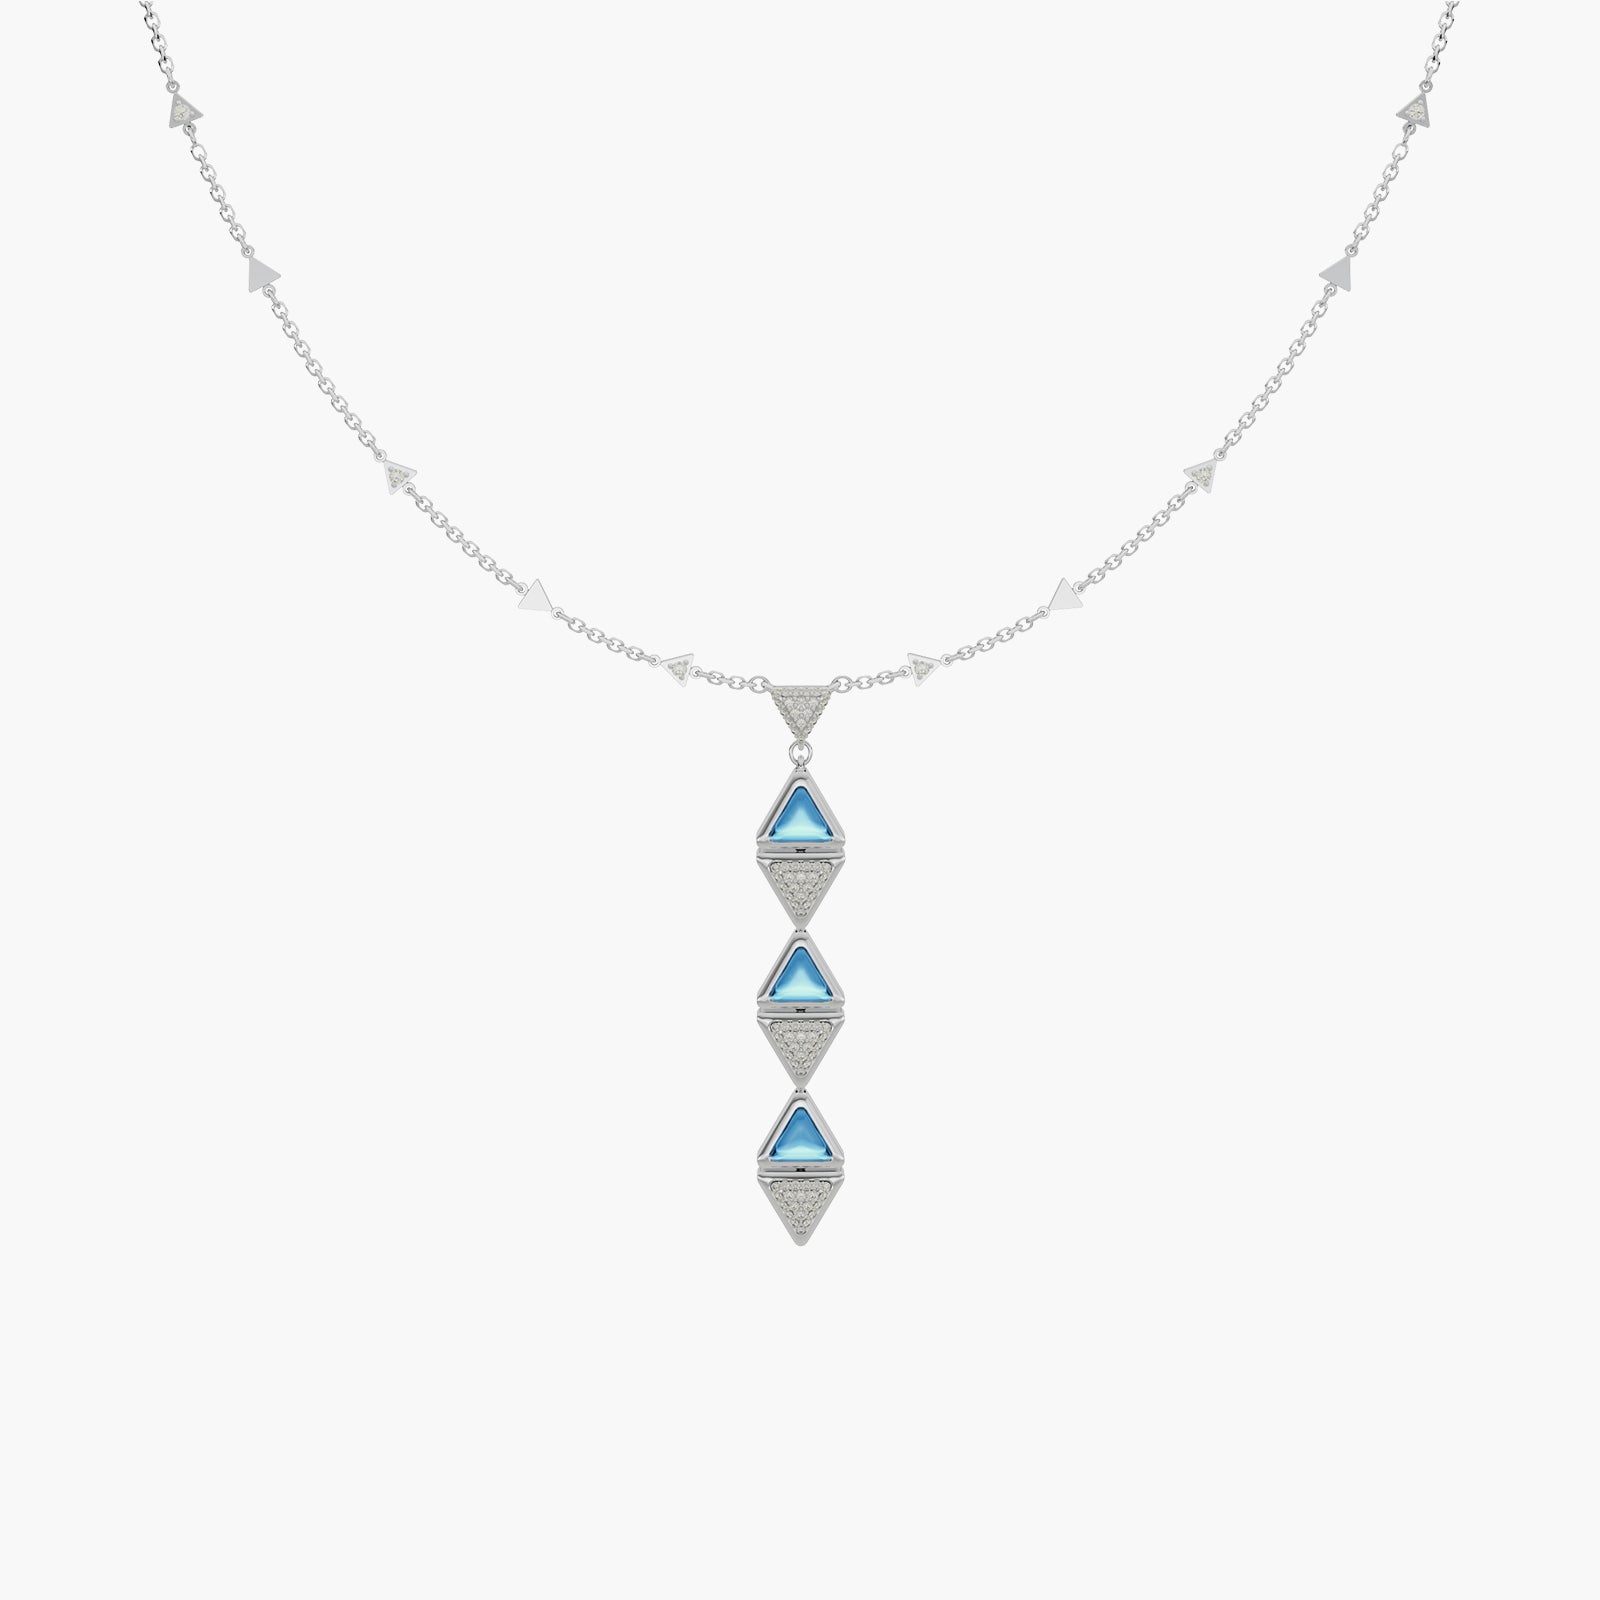 Necklace One Mirror Exquisite White Gold Blue Topaz and Diamonds